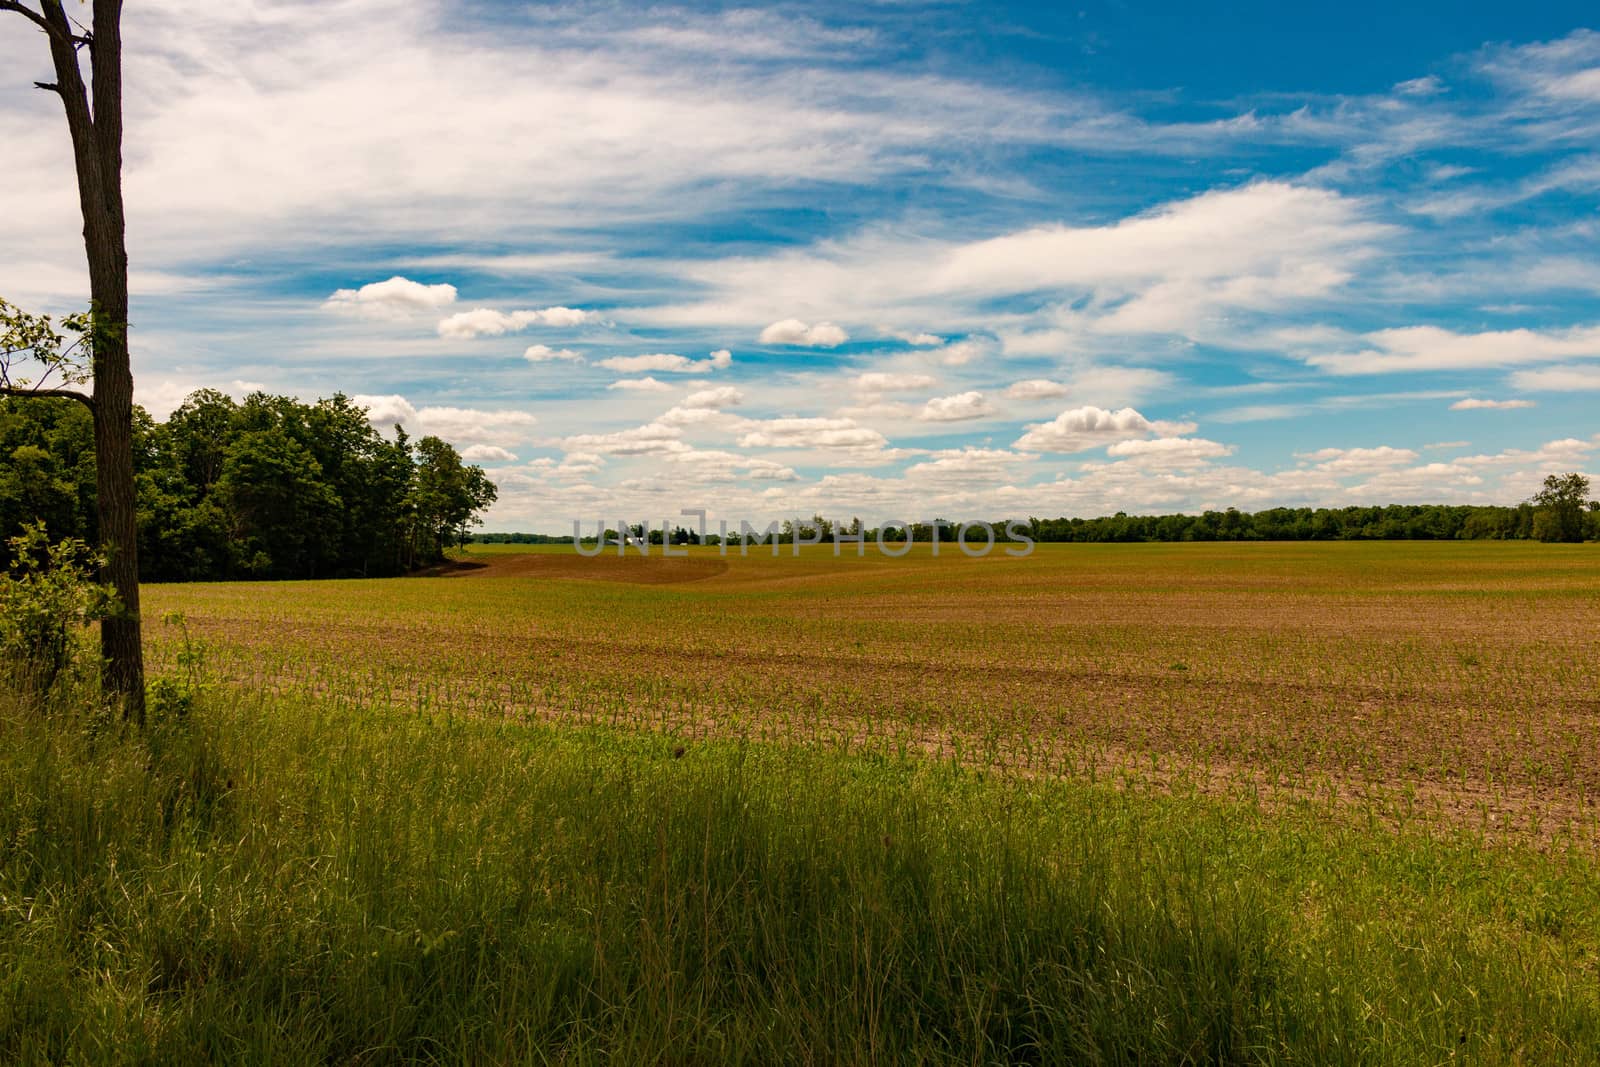 Farm land, Ontario, Canada. View of freshly planted fields